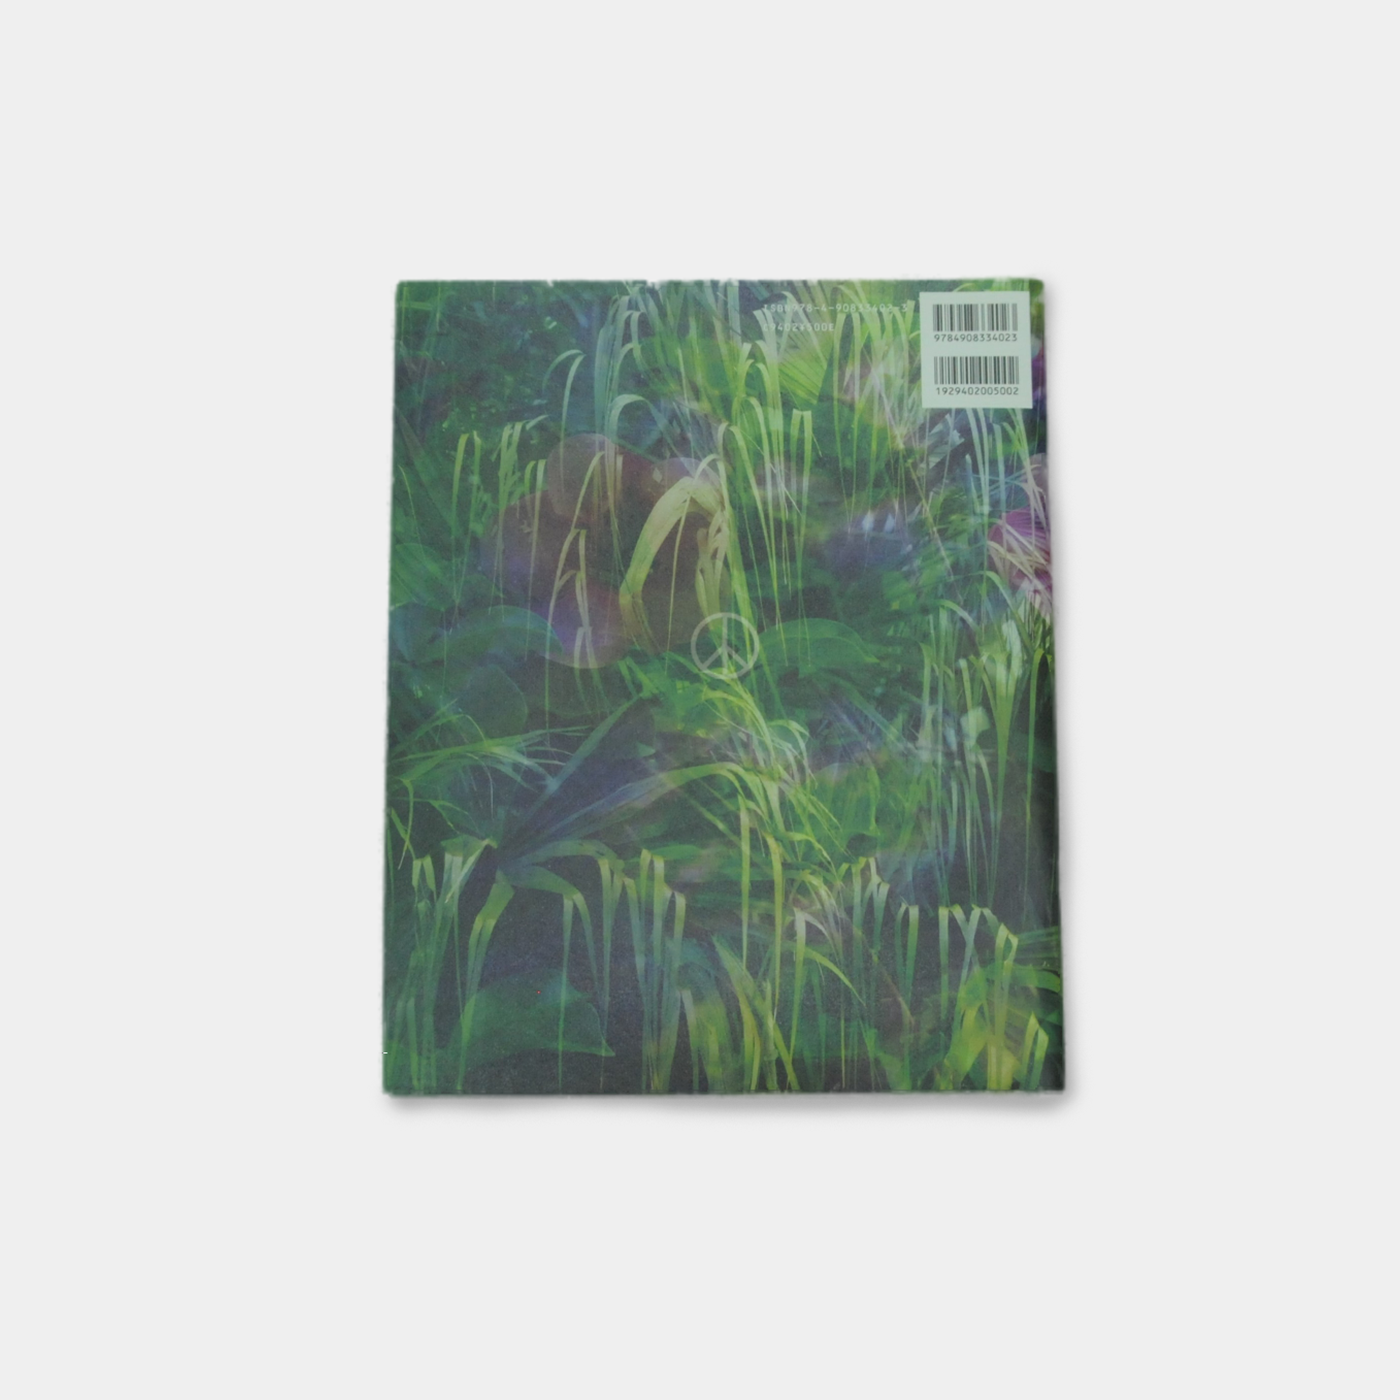 Nepenthes in print #3